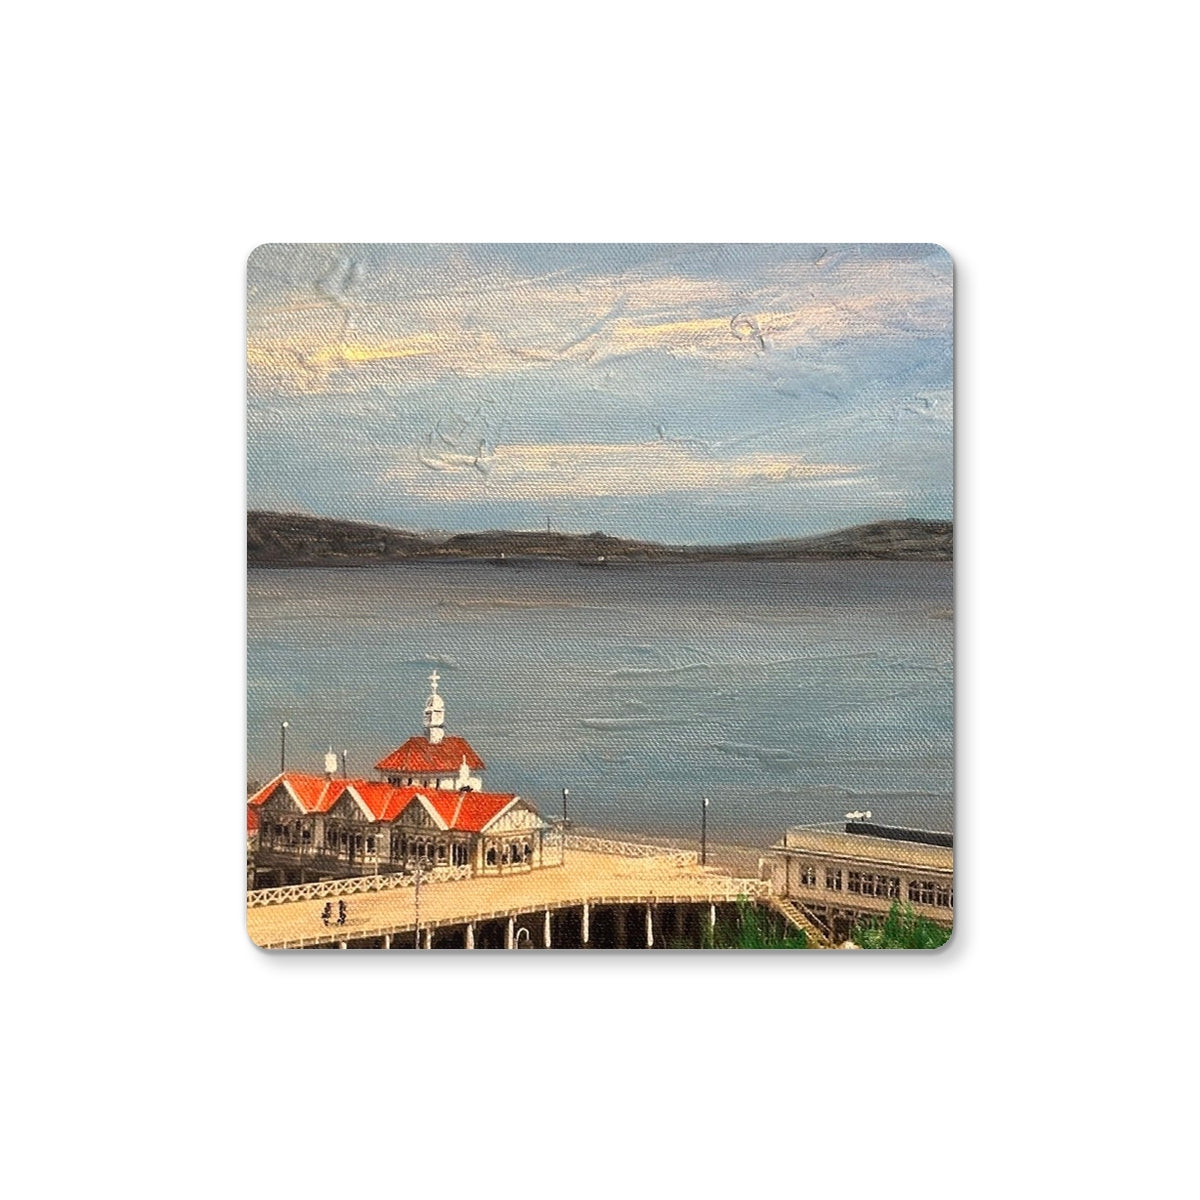 Looking From Dunoon Art Gifts Coaster-Coasters-River Clyde Art Gallery-Single Coaster-Paintings, Prints, Homeware, Art Gifts From Scotland By Scottish Artist Kevin Hunter